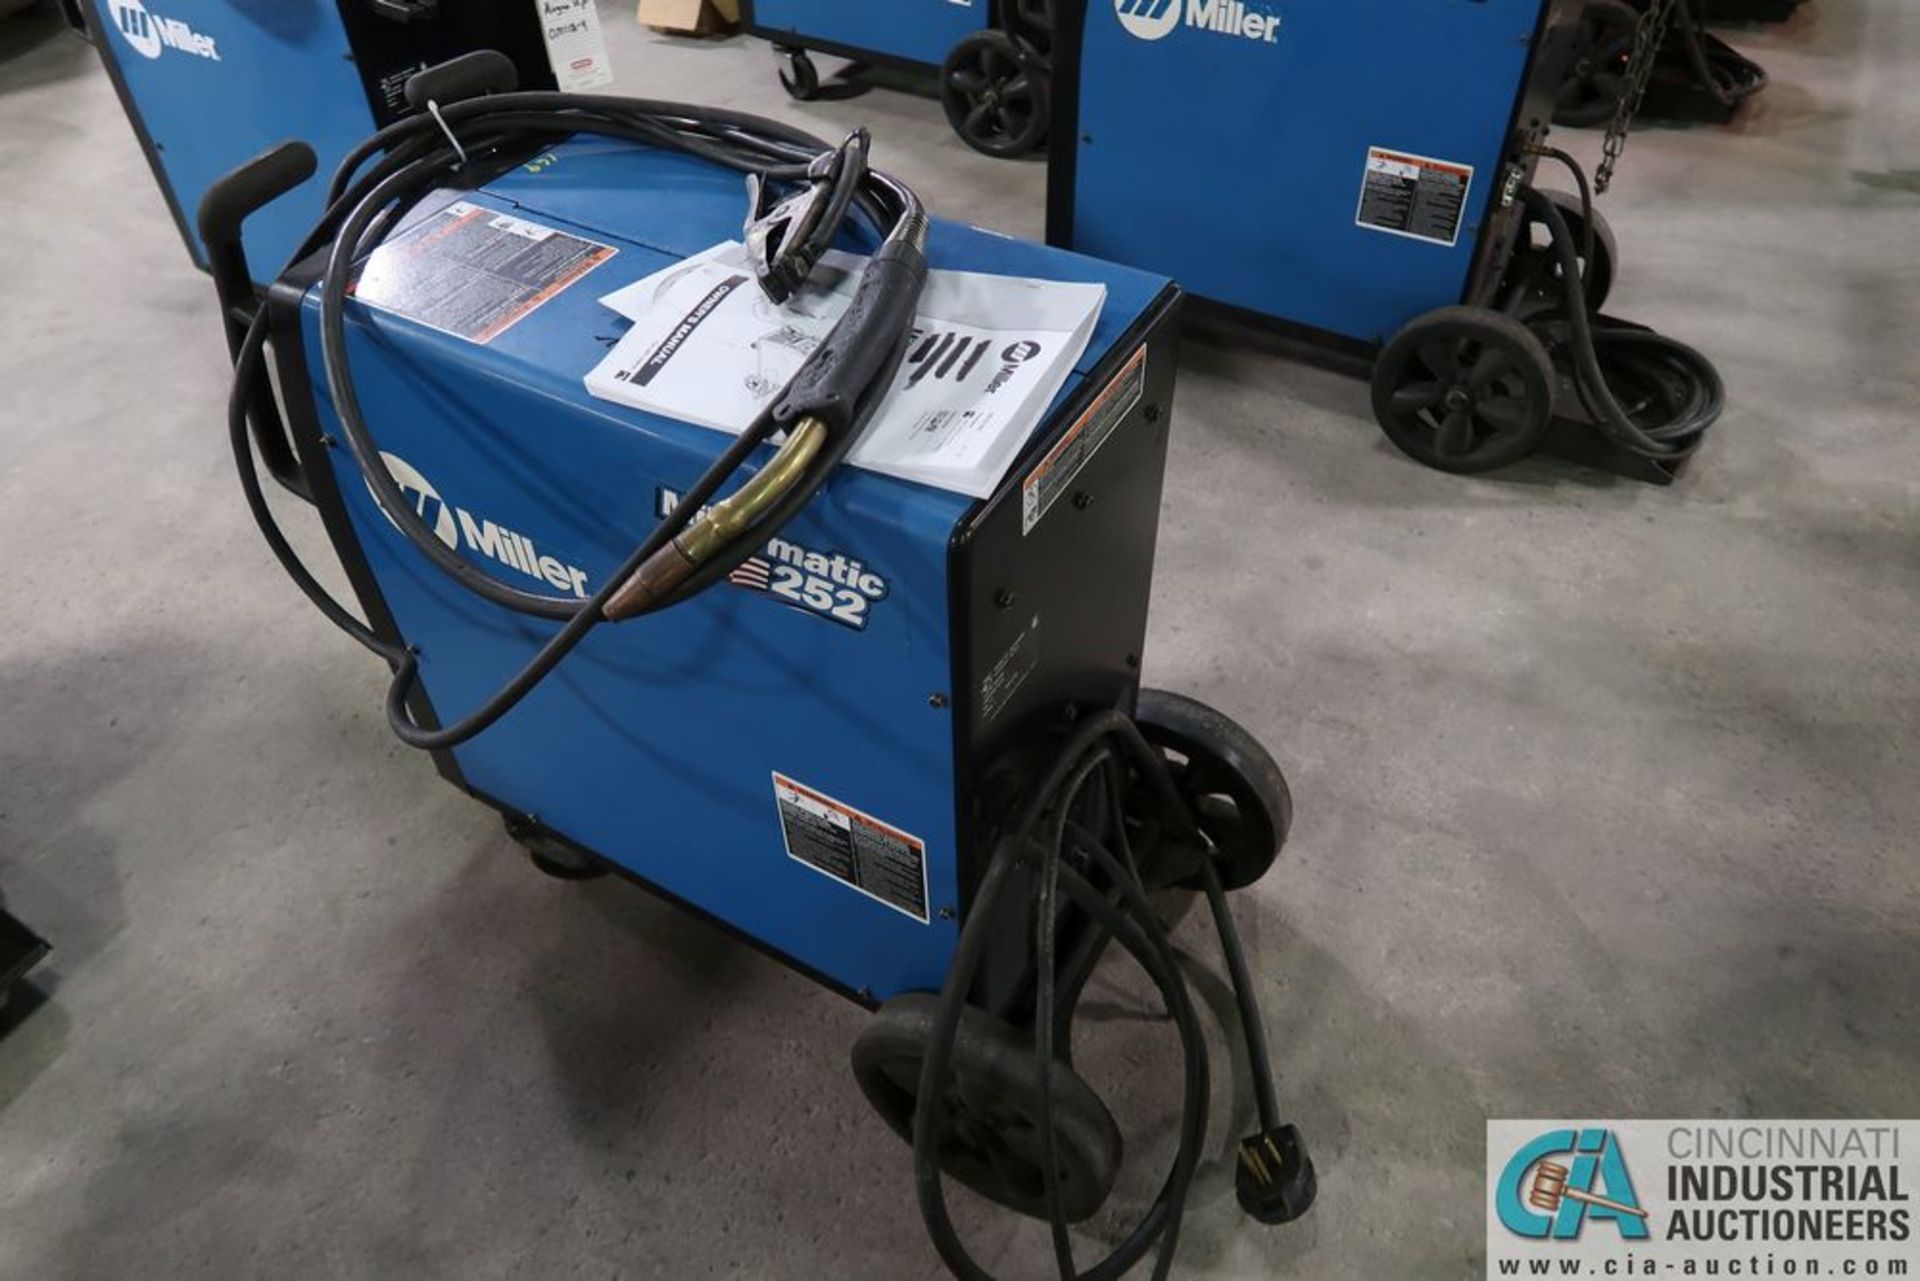 250 AMP MILLER MODEL MILLERMATIC 252 MIG WELDING POWER SOURCE; S/N MA190308N, WITH BUILT-IN WIRE - Image 6 of 7